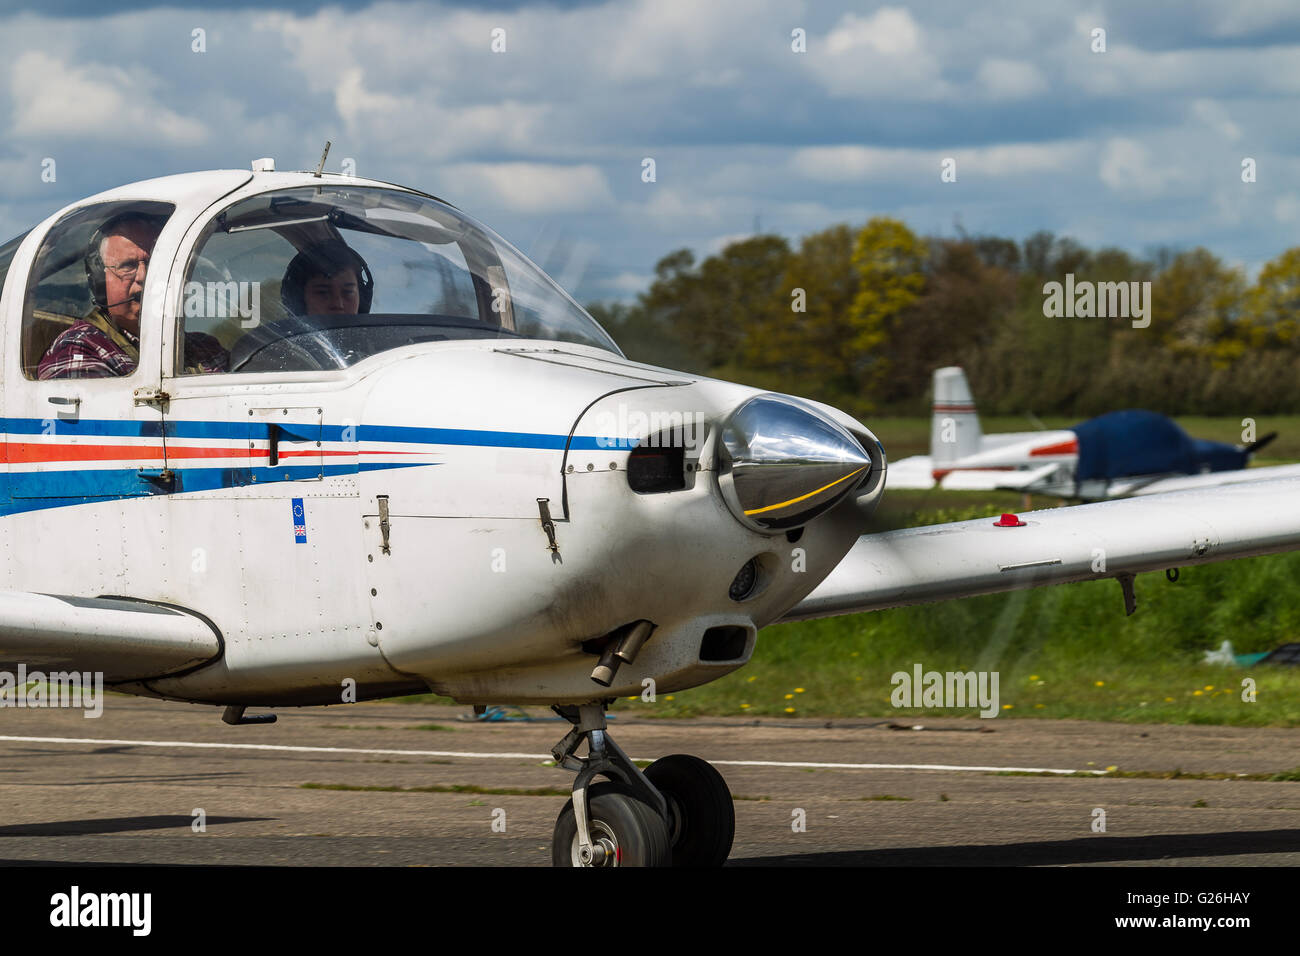 A Piper PA-38, G-BRHR taxis in after landing at Elstree Airfield in Hertfordshire, UK. Close-up of cockpit, engine and propeller Stock Photo